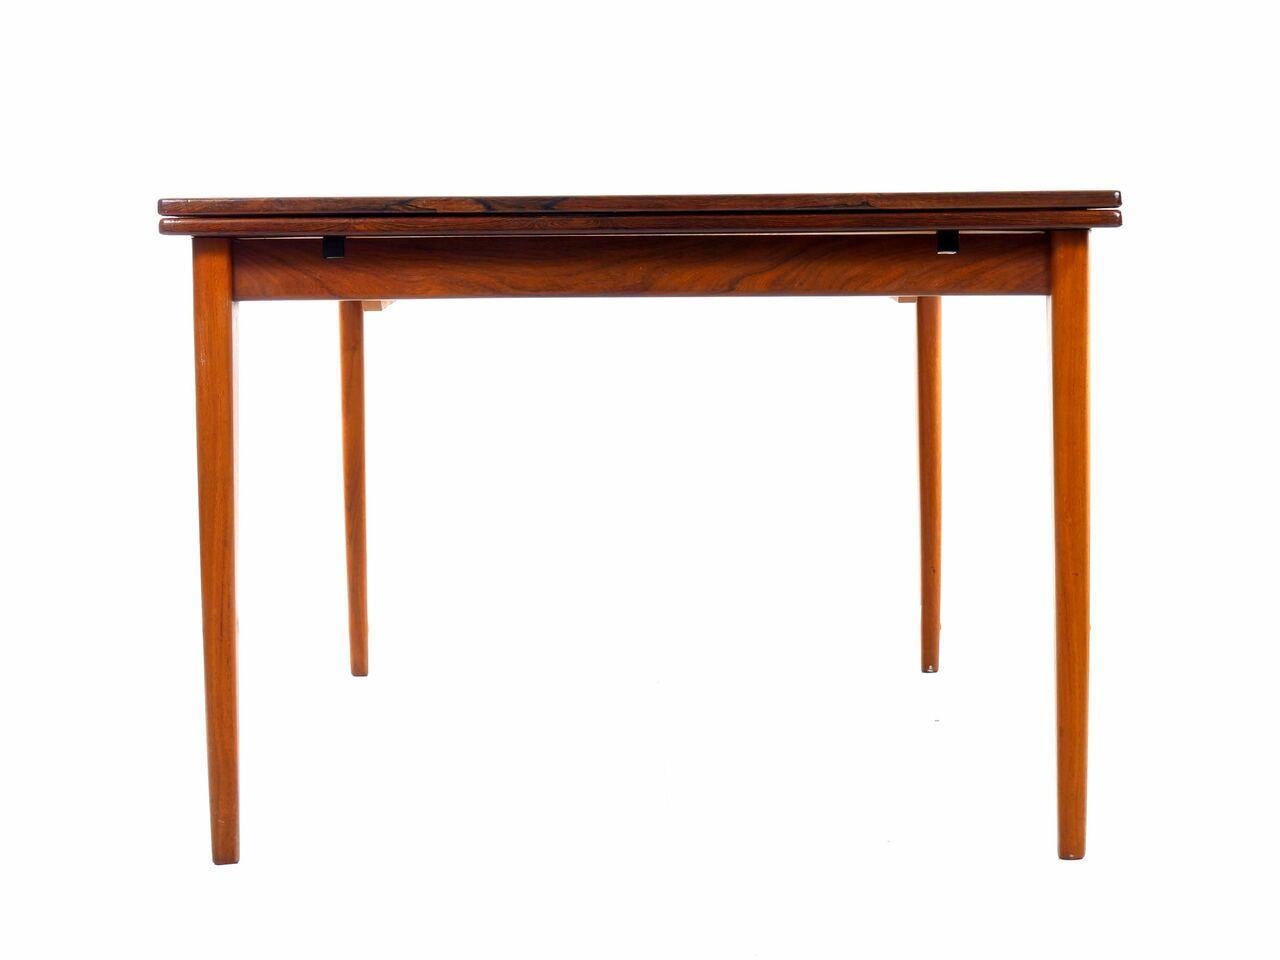 Danish Mid-Century Modern Rosewood Dining Table by Niels Møller, Model No. 254 2